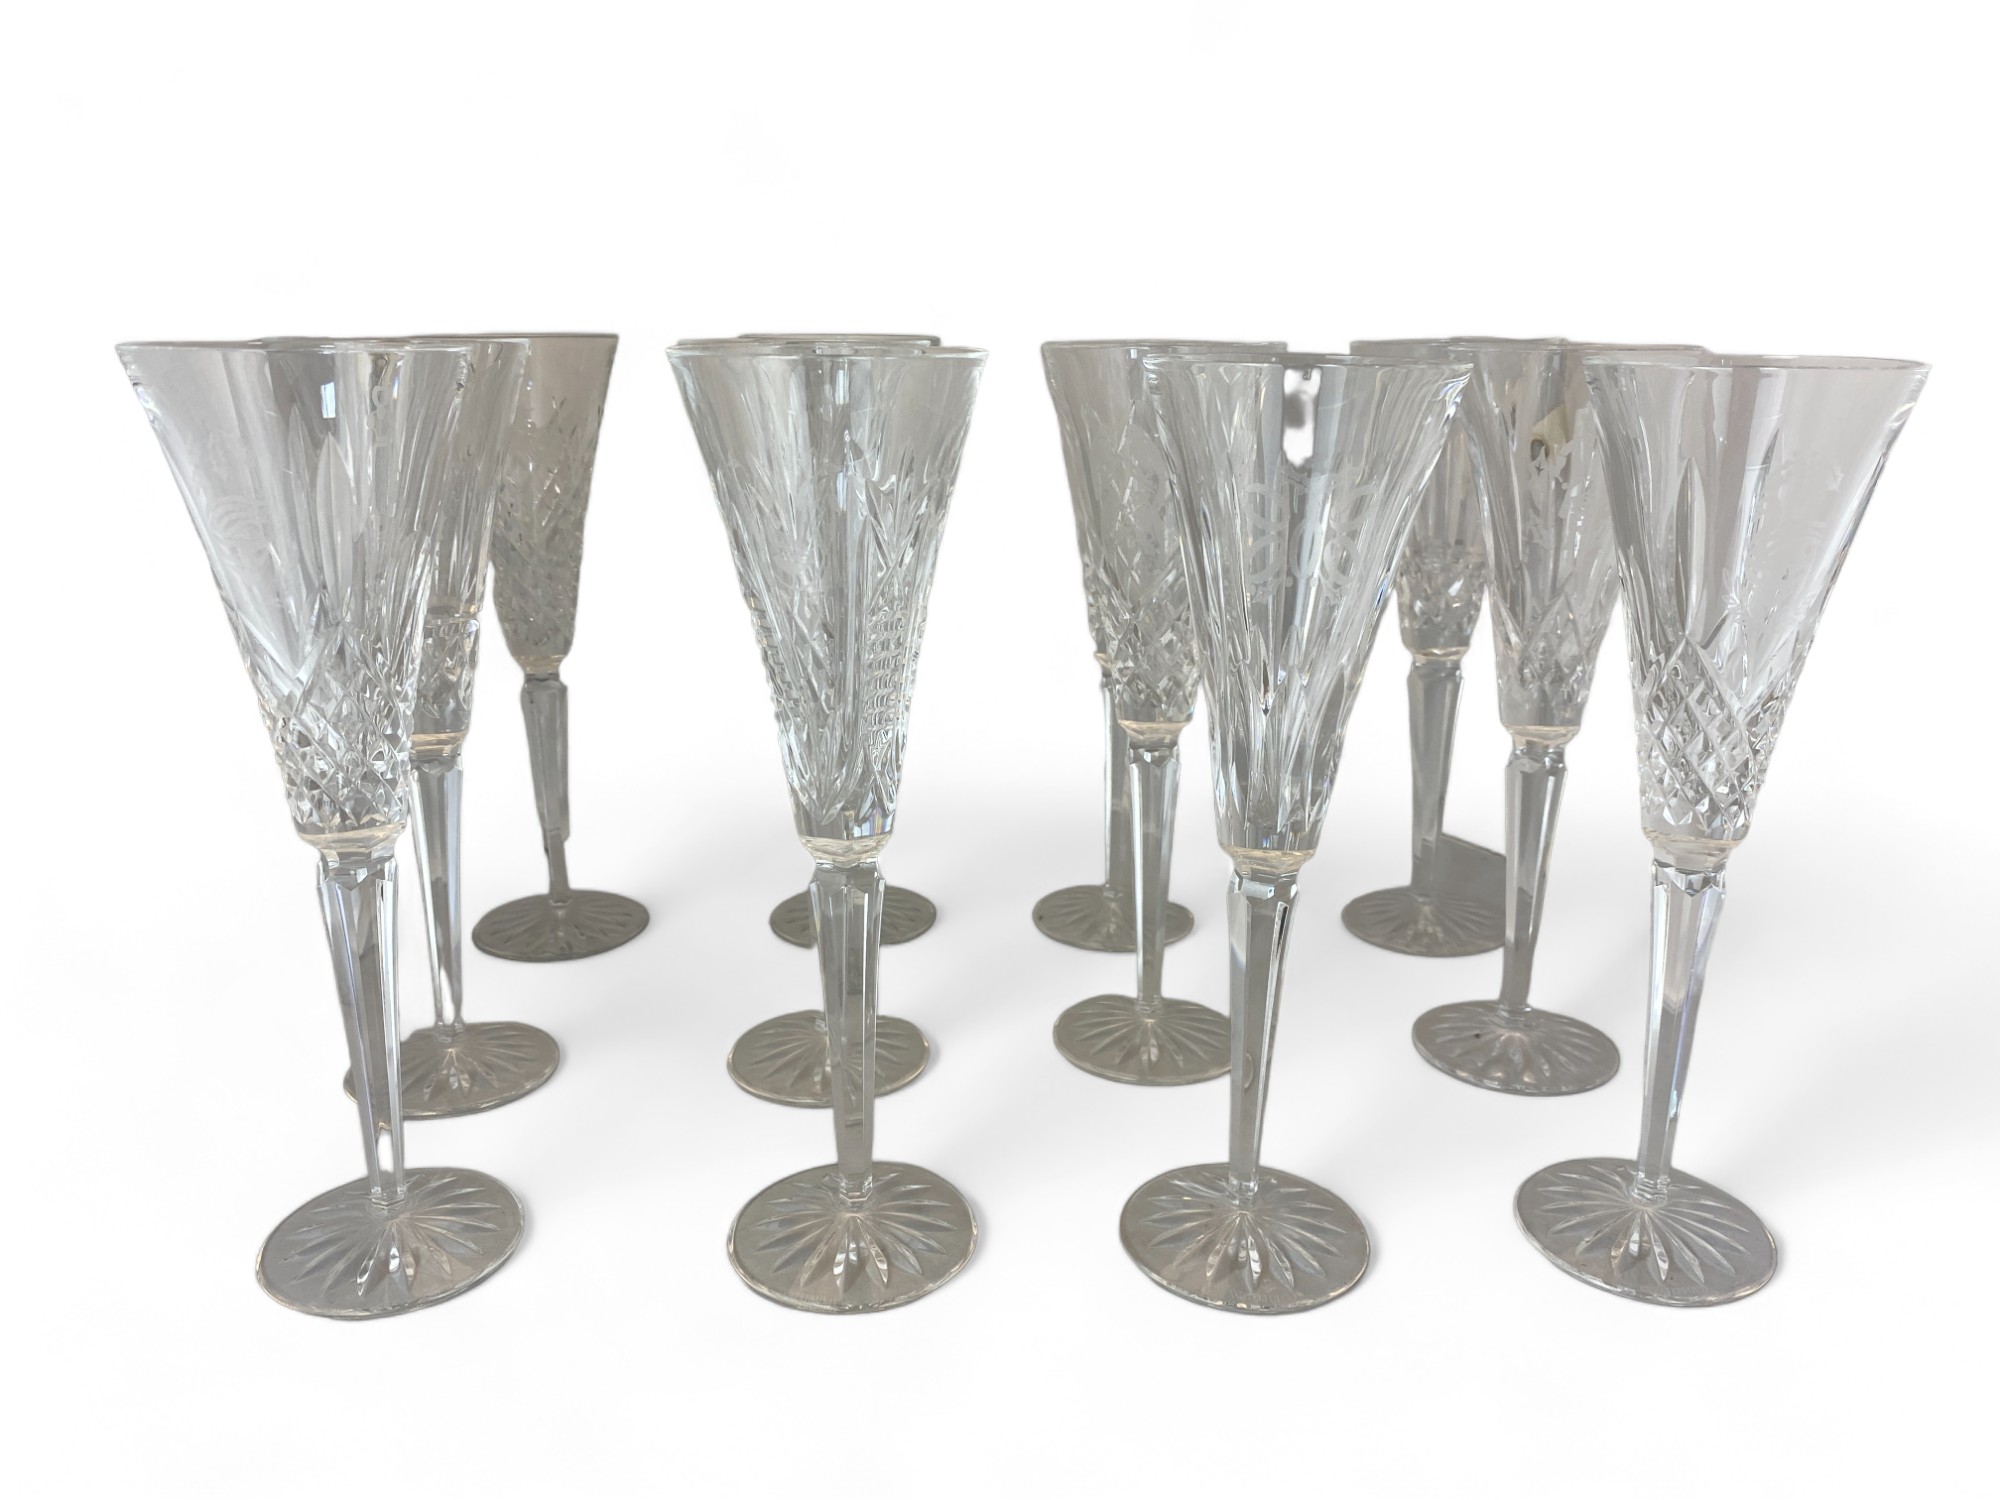 A set of nineteen Waterford Crystal cut glass champagne flutes / glasses